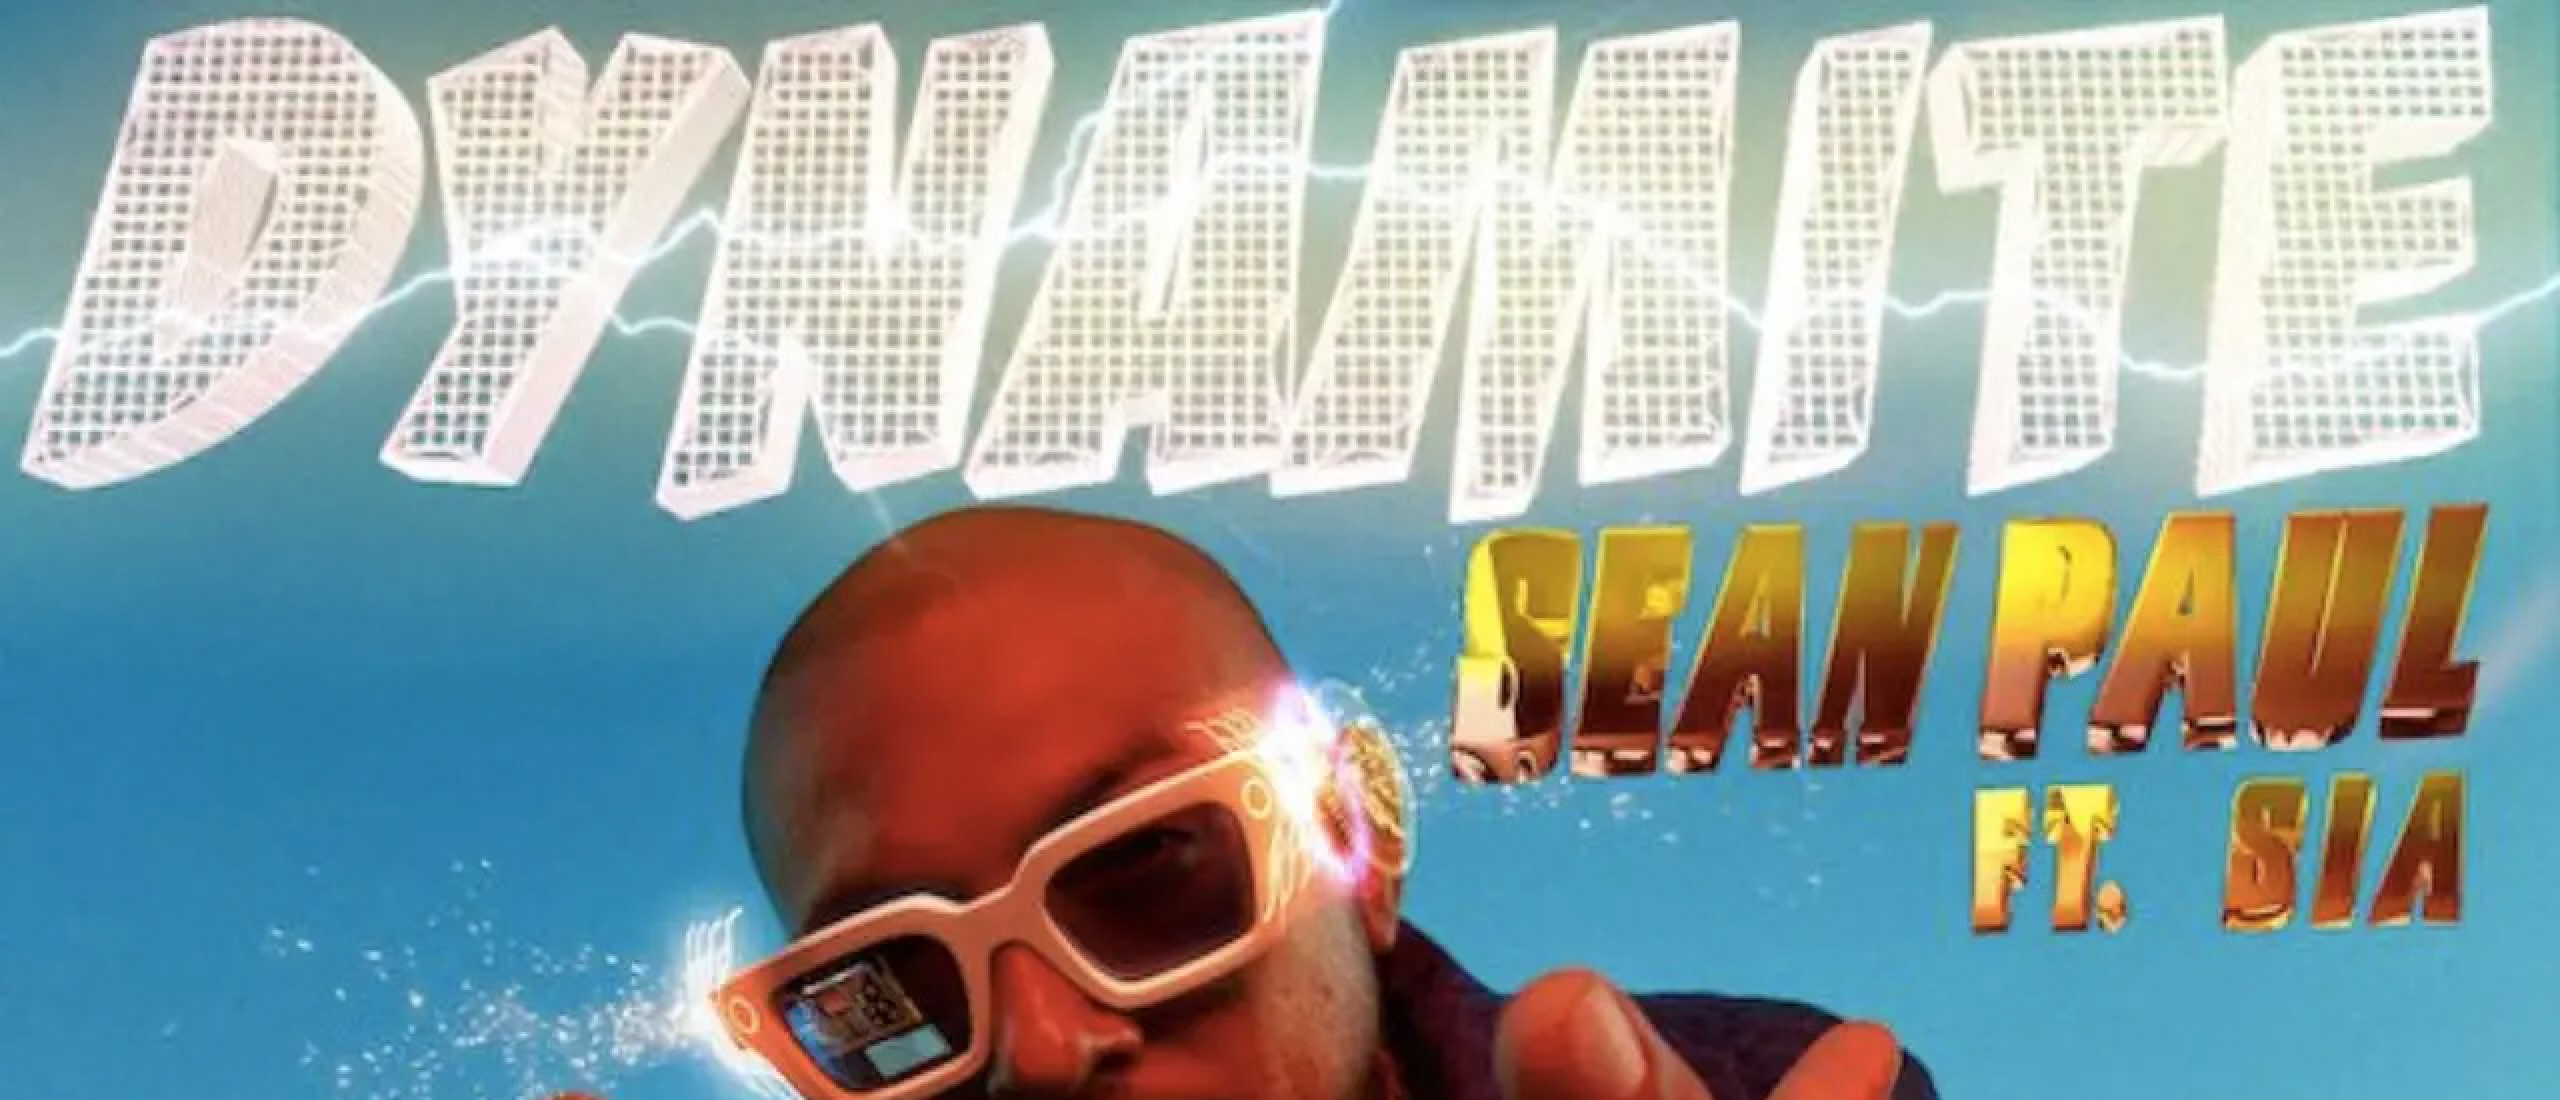 Forgotten Song Friday Sean Paul featuring Sia Dynamite